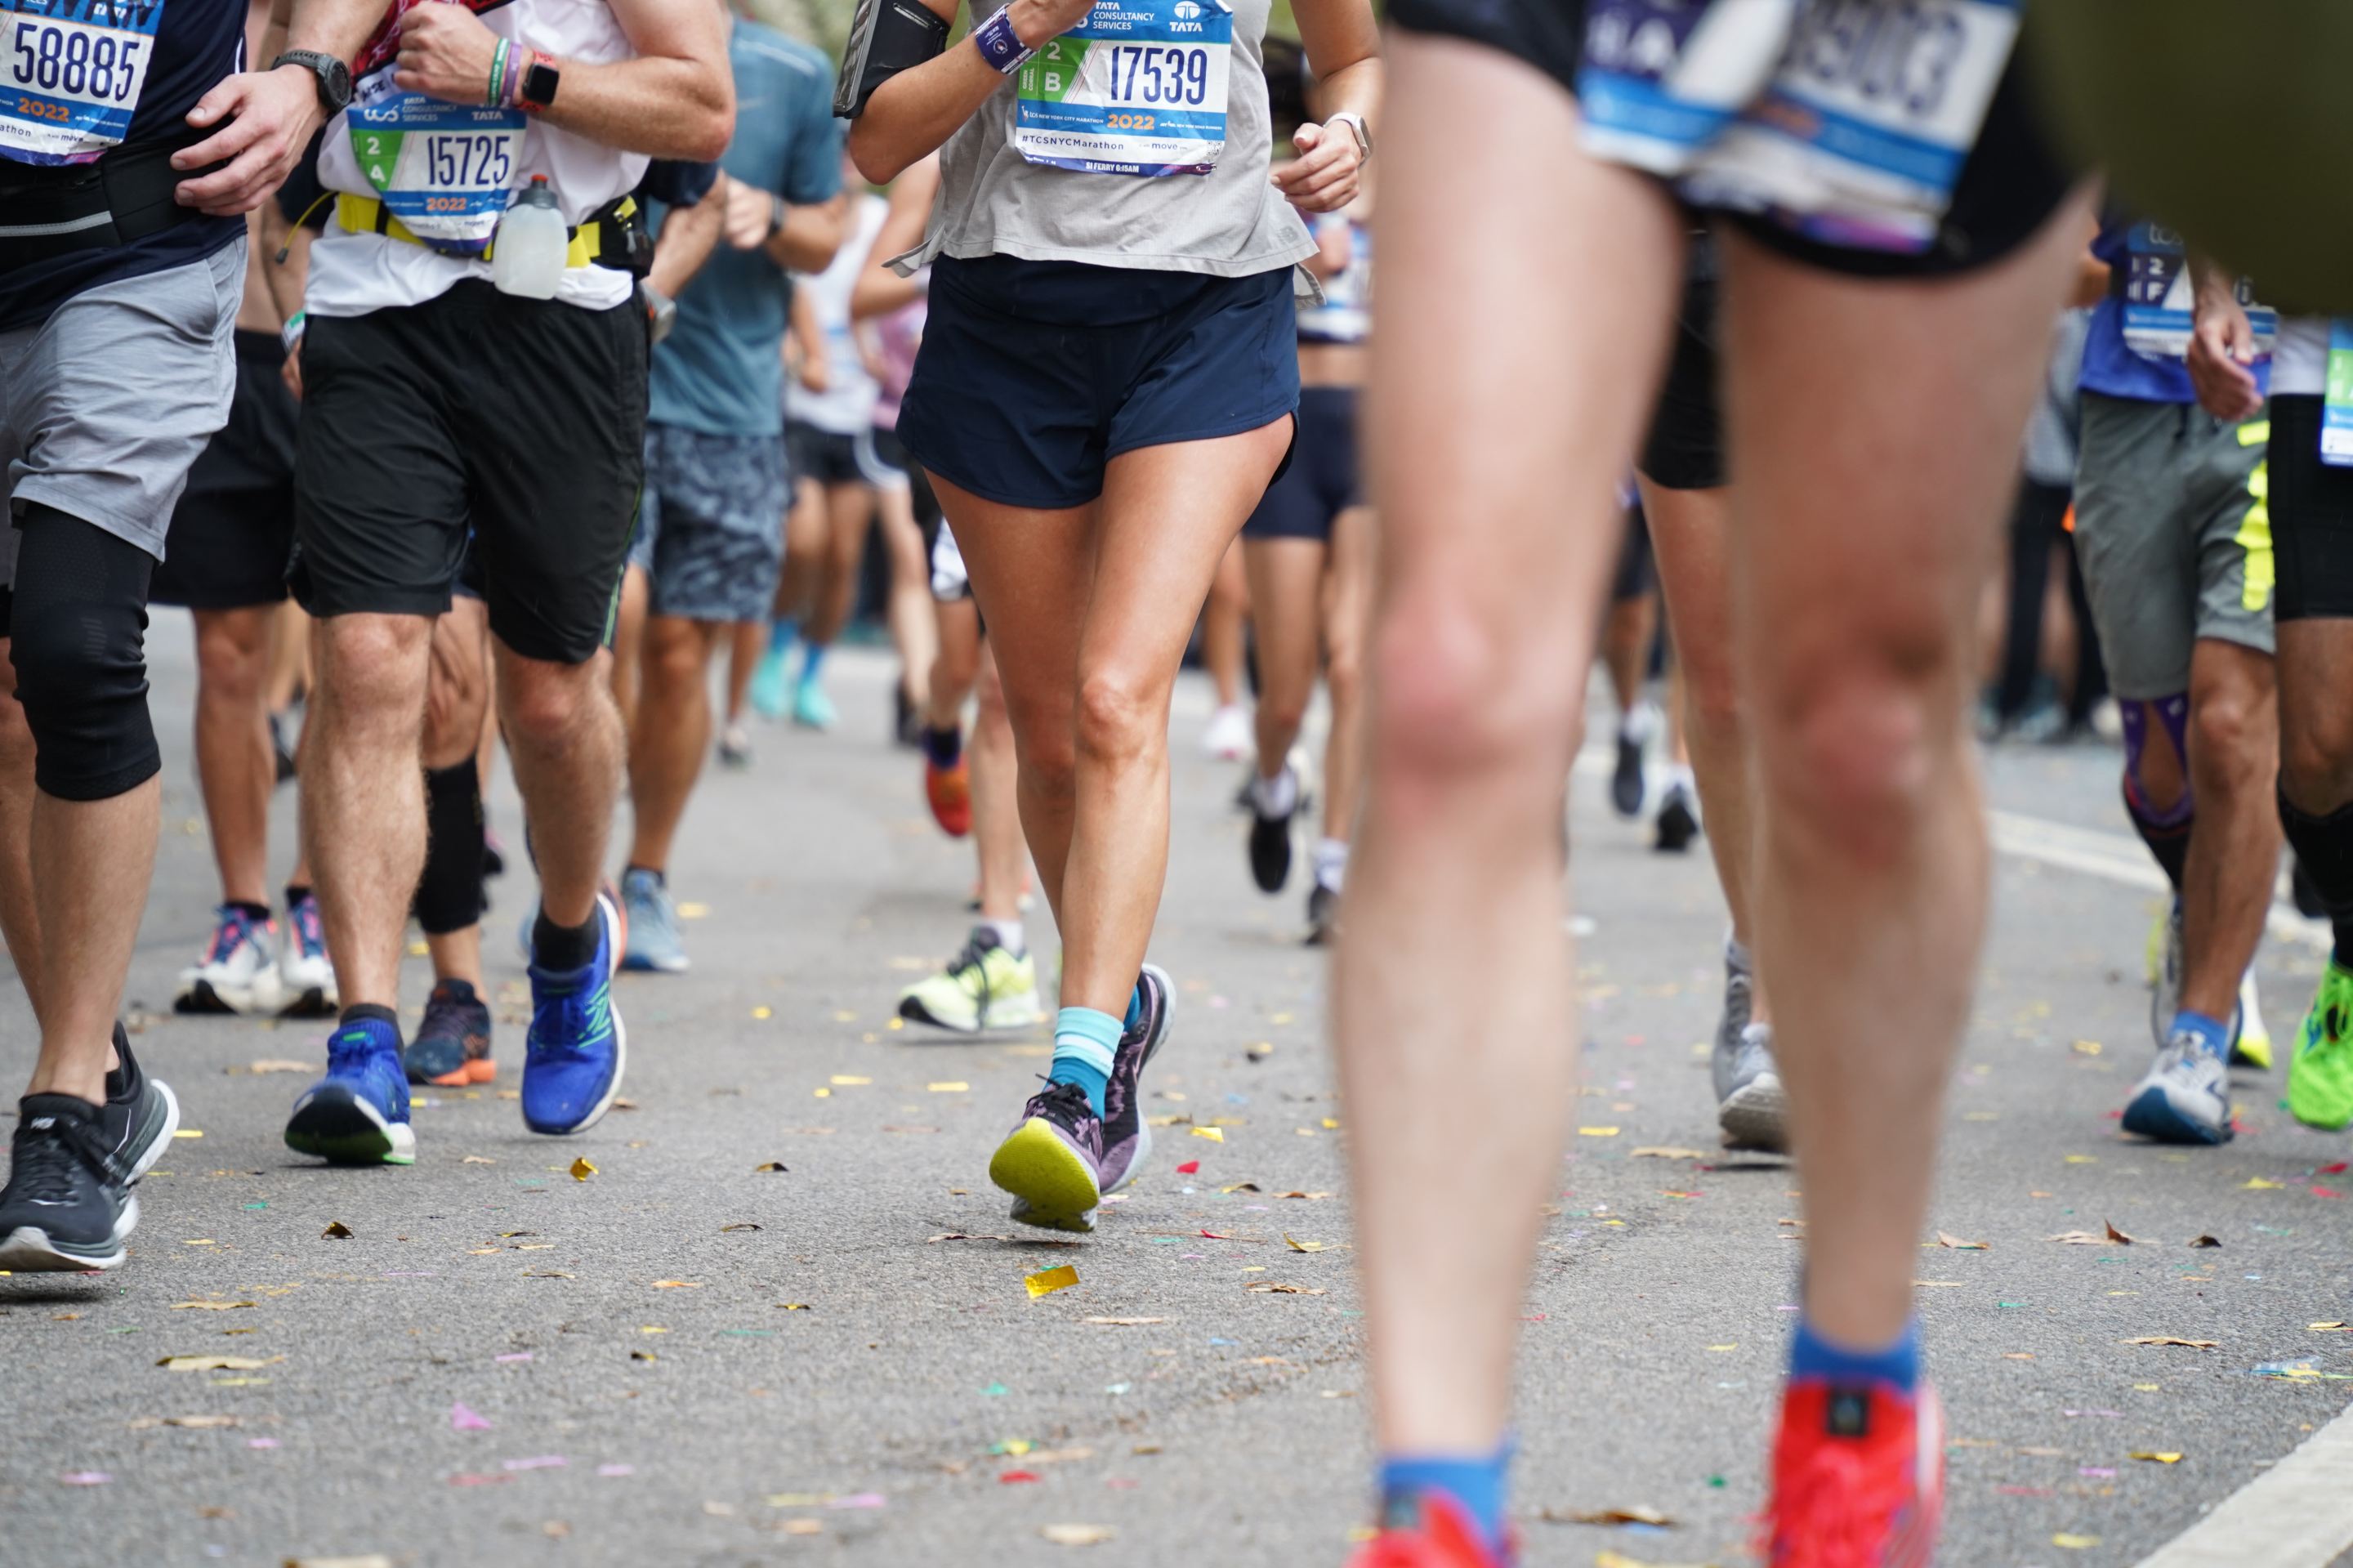 A photo of the torsos and legs of dozens of people running the NYC Marathon.